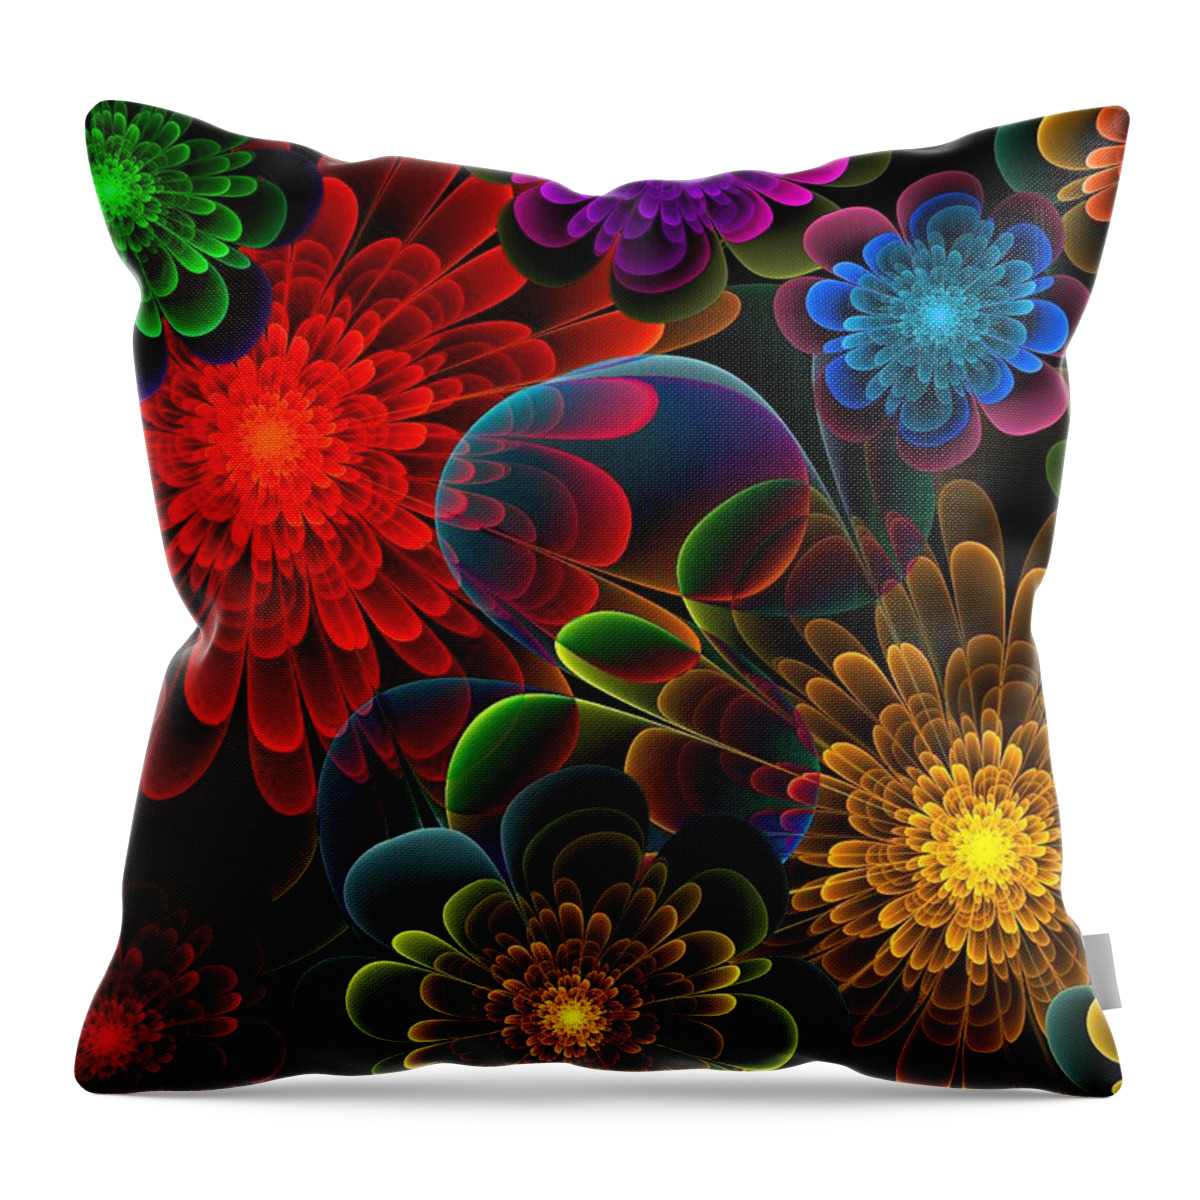 Abstract Throw Pillow featuring the digital art Fractal Bouquet by Lyle Hatch